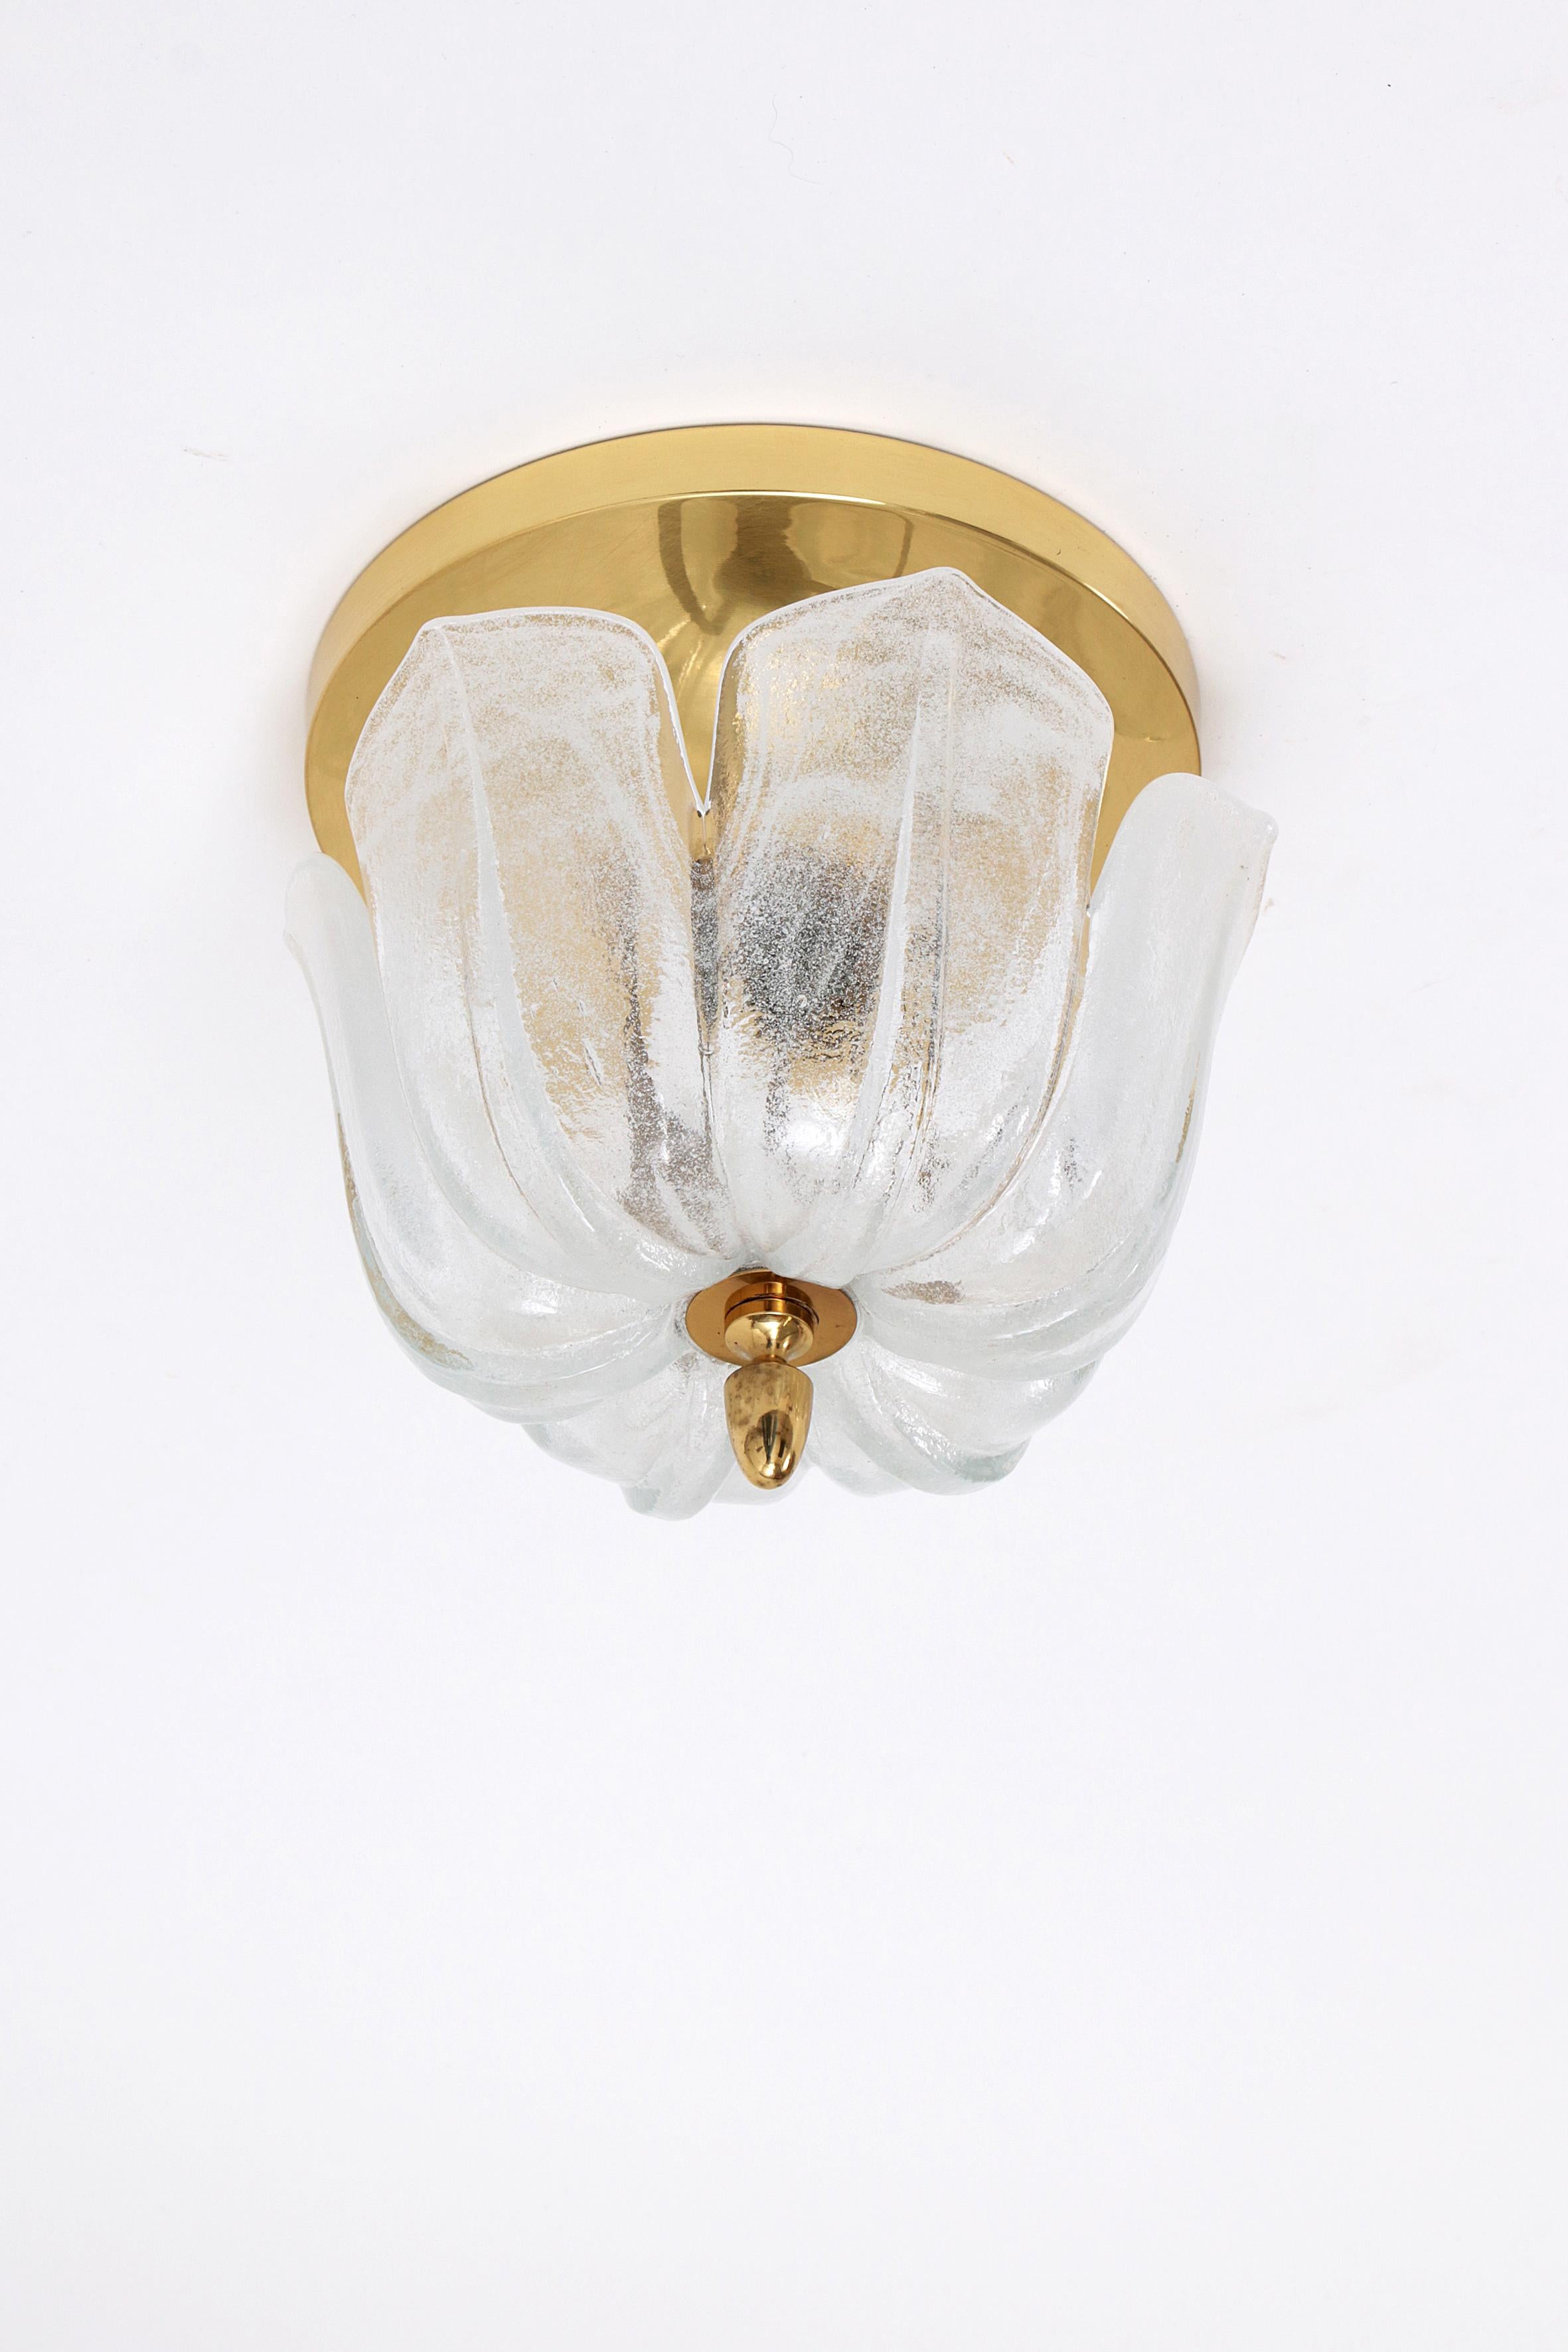 Mid-century modern flower-shaped glass ceiling lamp by Glashutte Limburg (Germany, 1960s). Thick textured glass on a brass metal base. Spreads a beautiful light (see photos). High quality workmanship. Cleaned, rewired and ready to use (compatible in